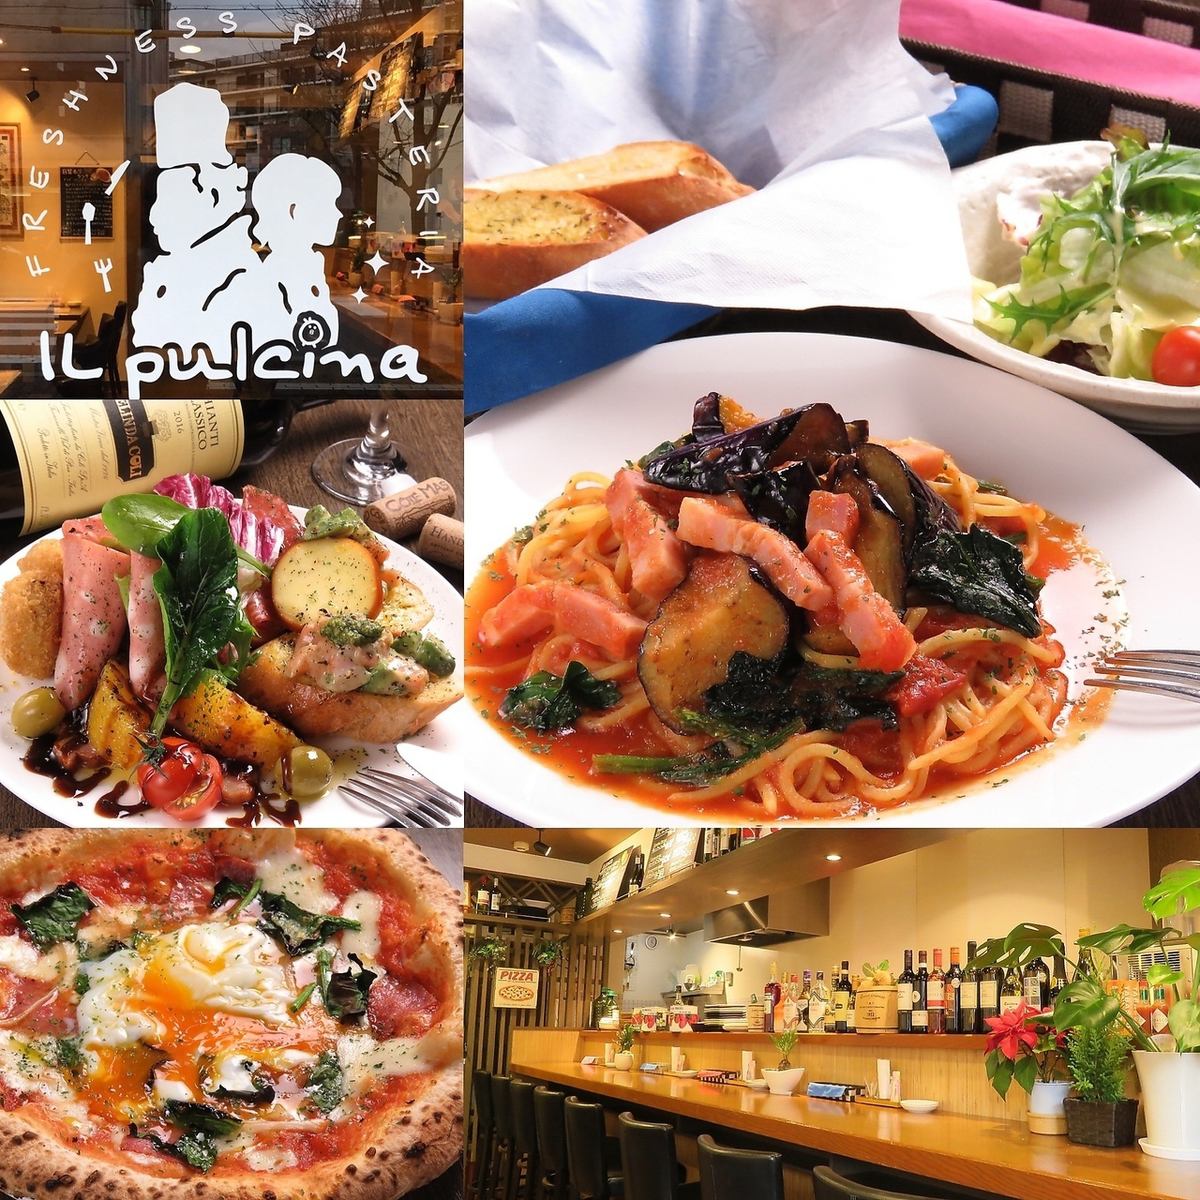 Come relaxed Italian at our shop ♪ There are many types of daily pasta lunch!